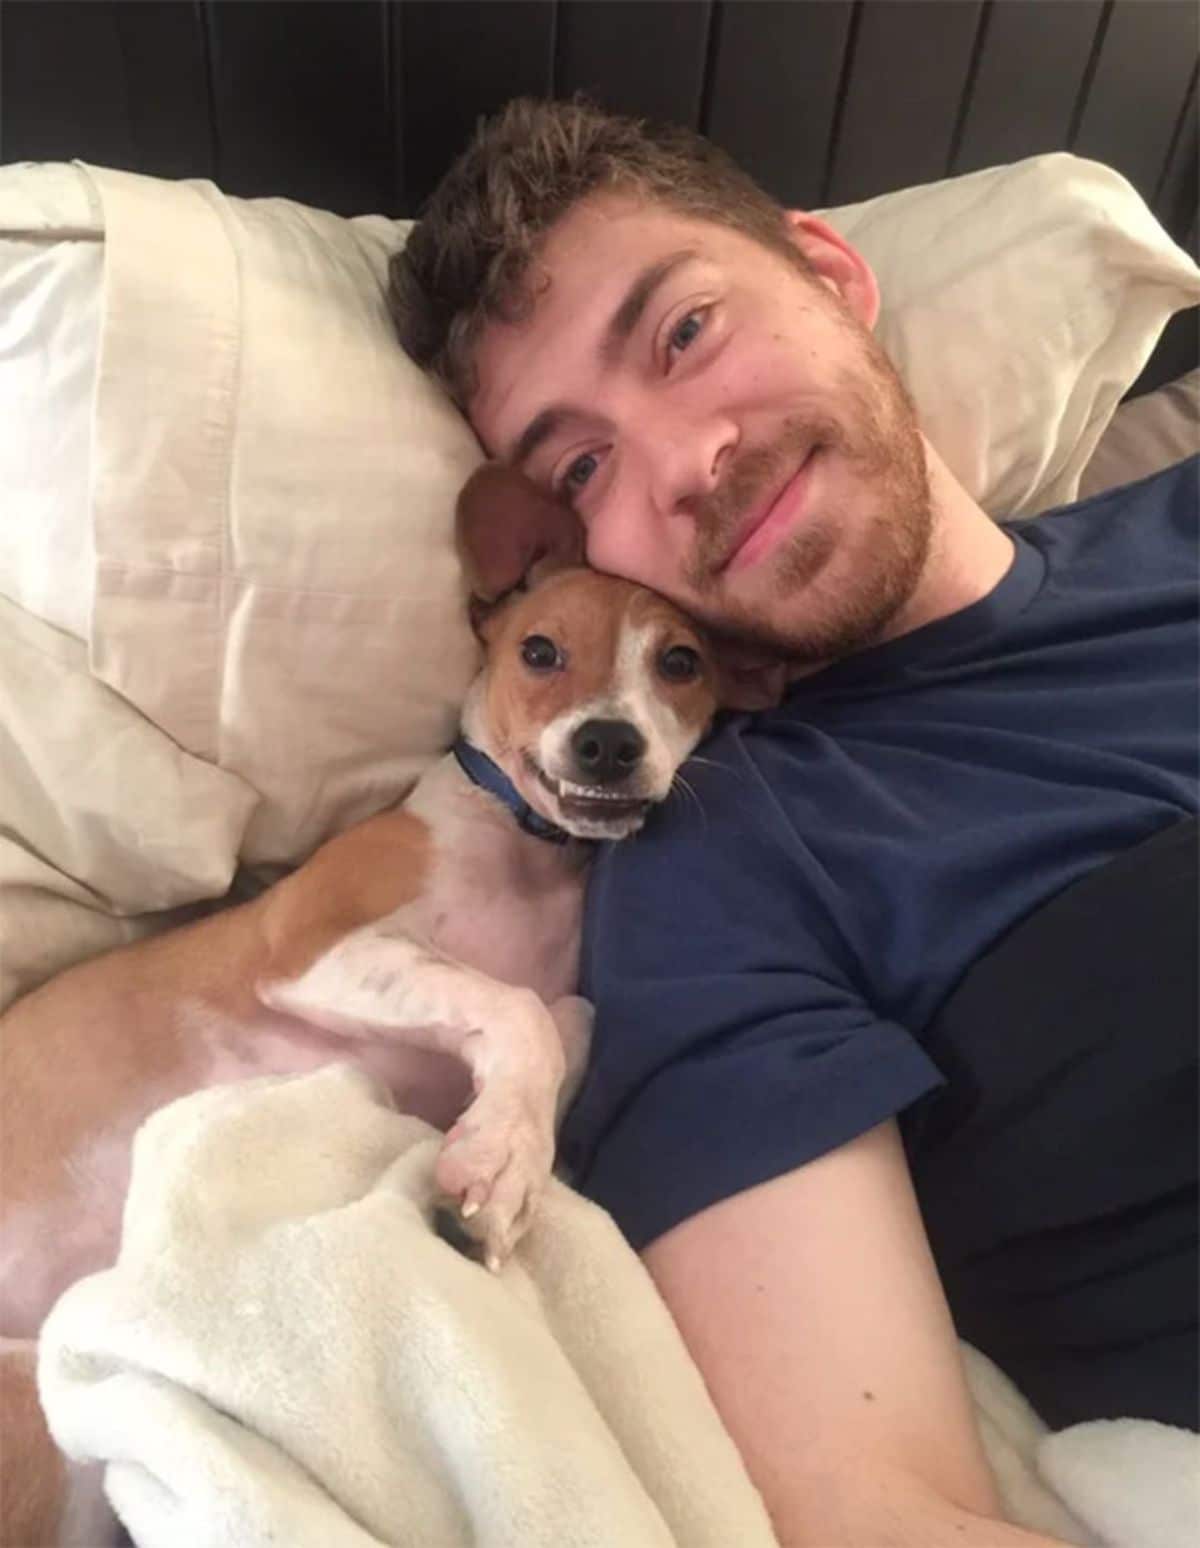 small brown and white dog cuddled with a man against a white pillow on a bed